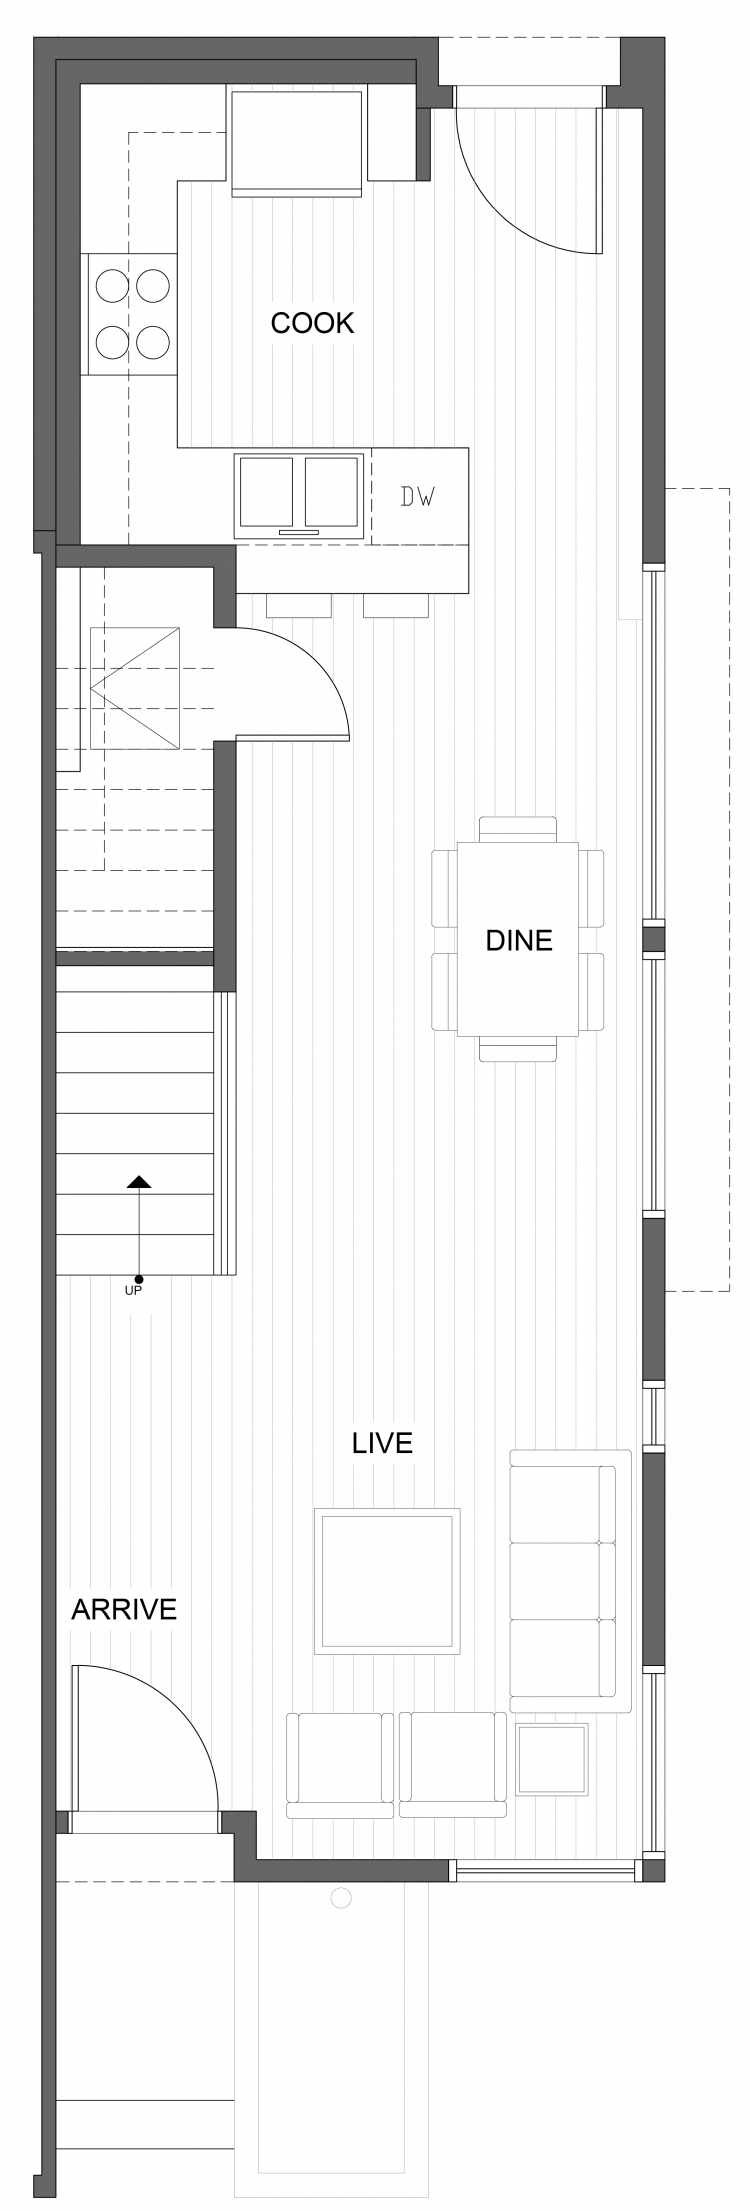 First Floor Plan of 1030C NE 70th St, One of the Sopris on 70th Townhomes in Roosevelt